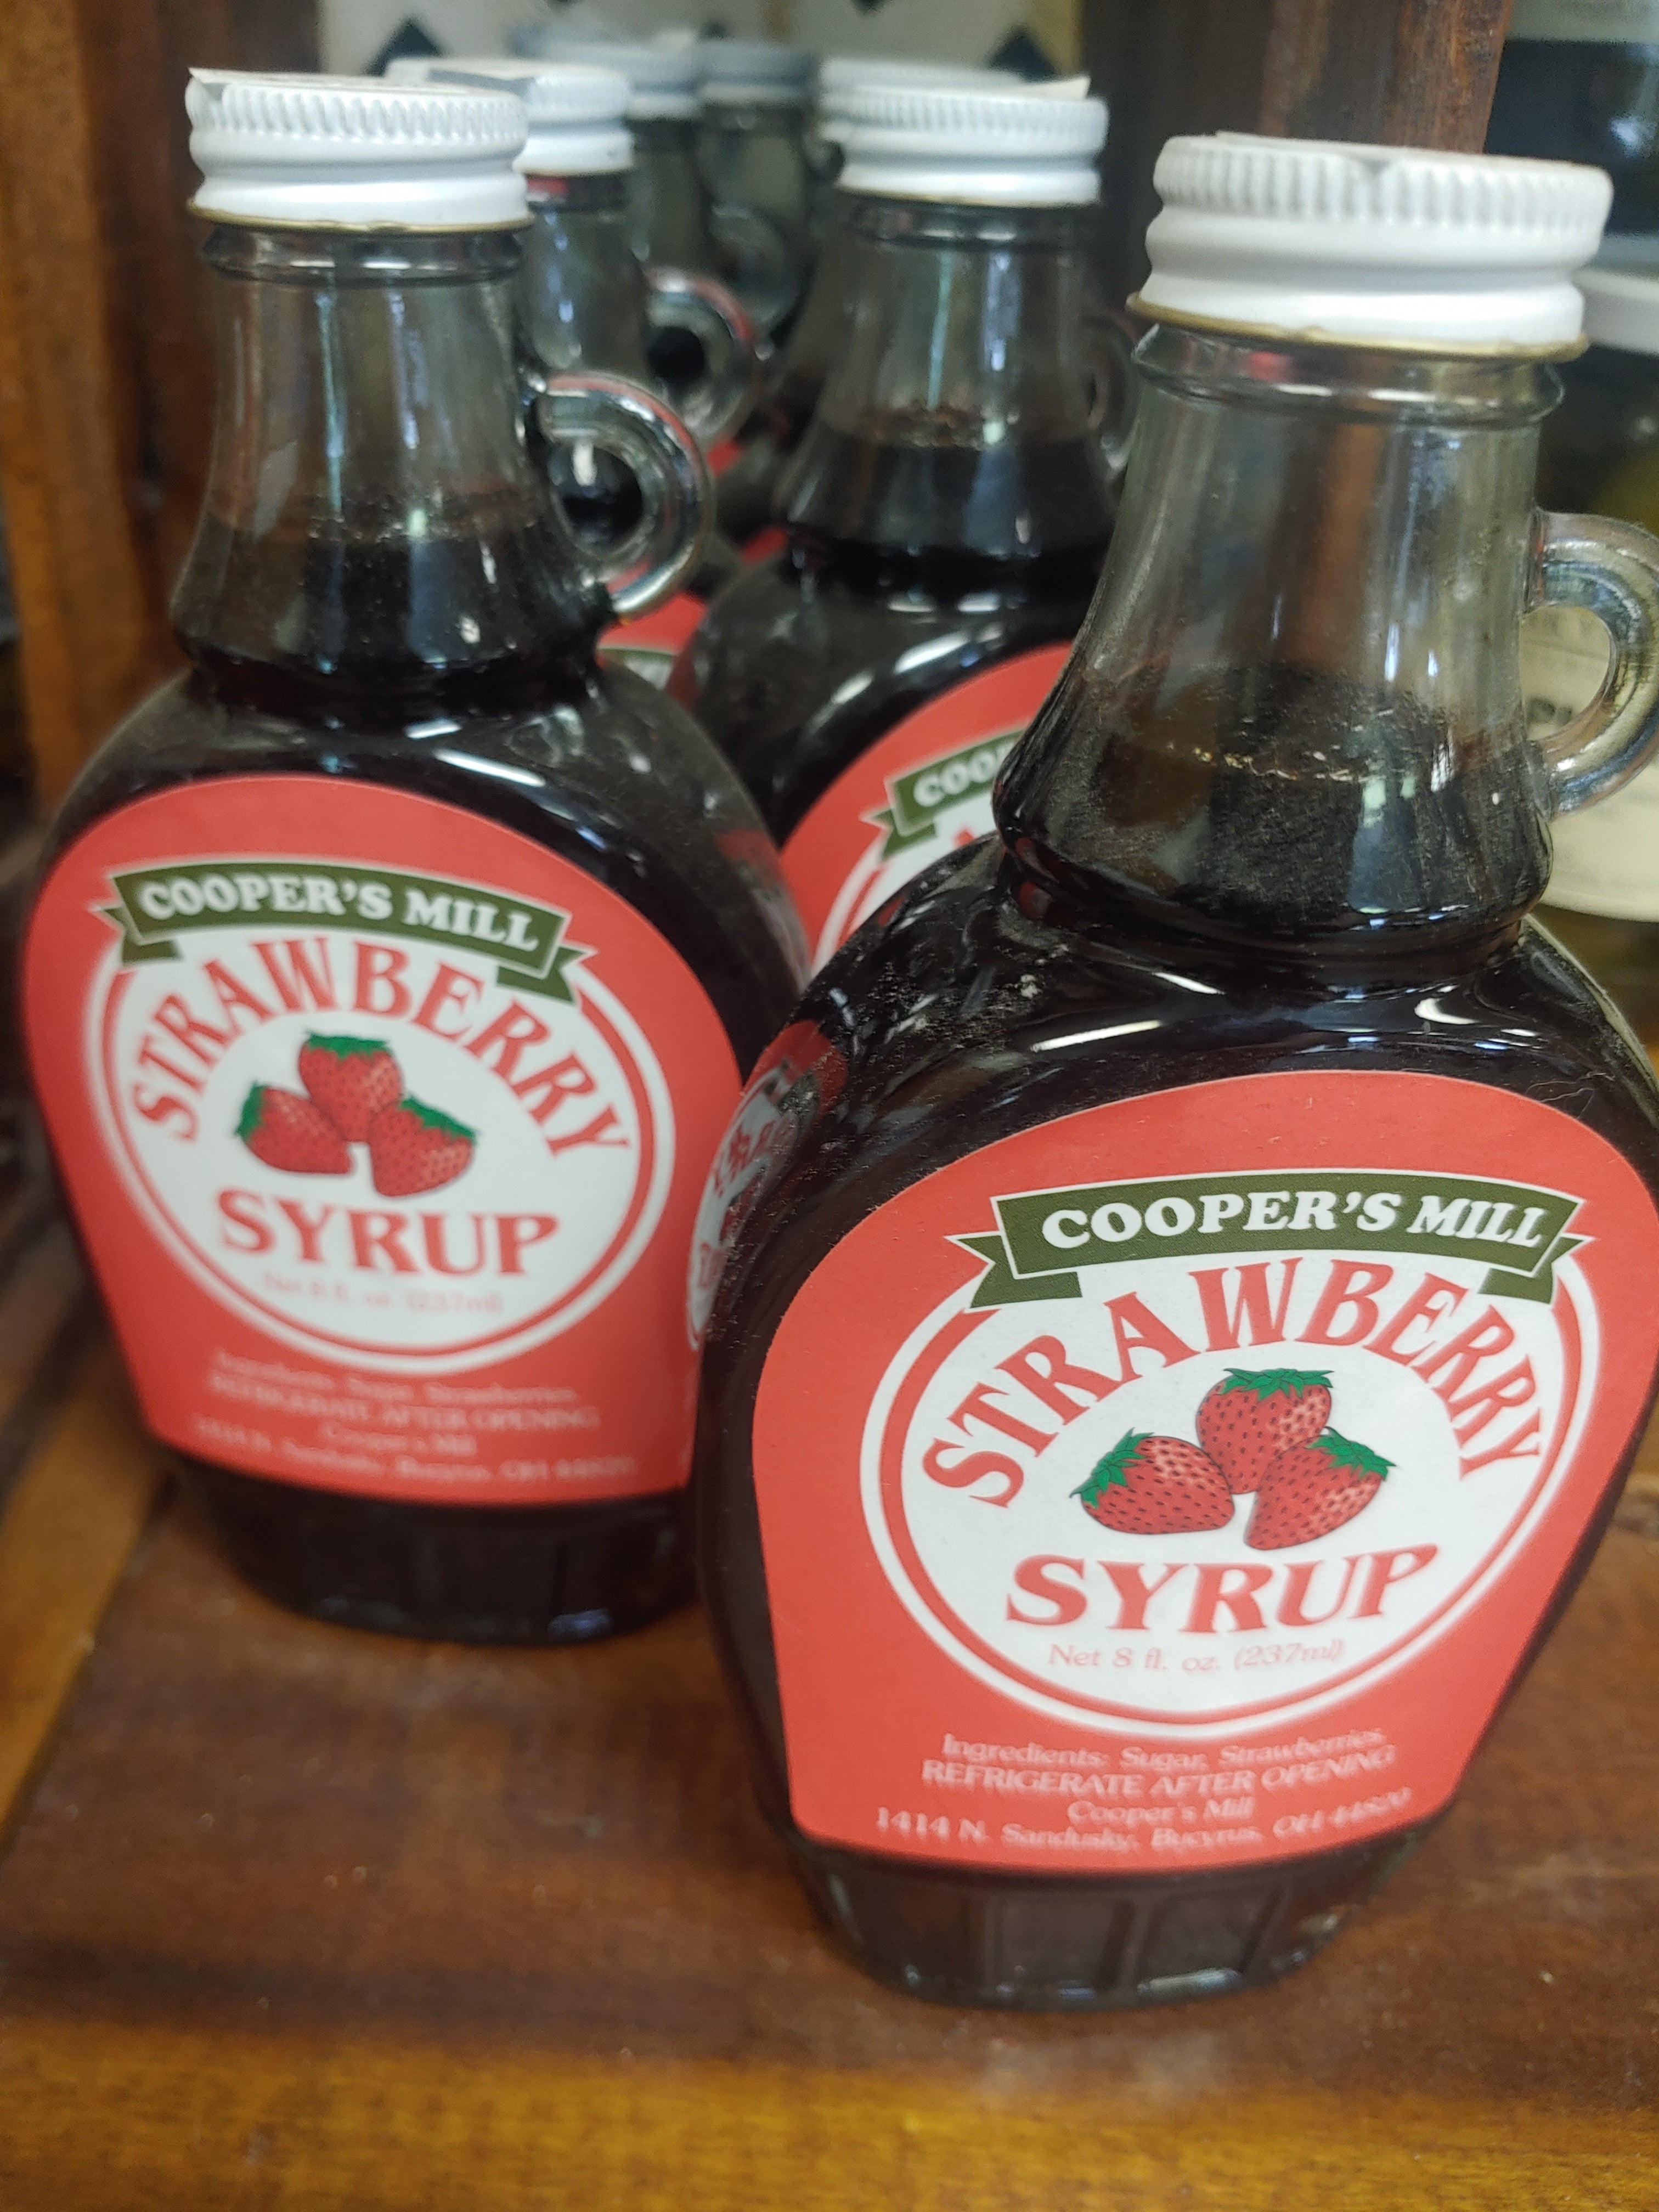 Strawberry Syrup for 5/25 only